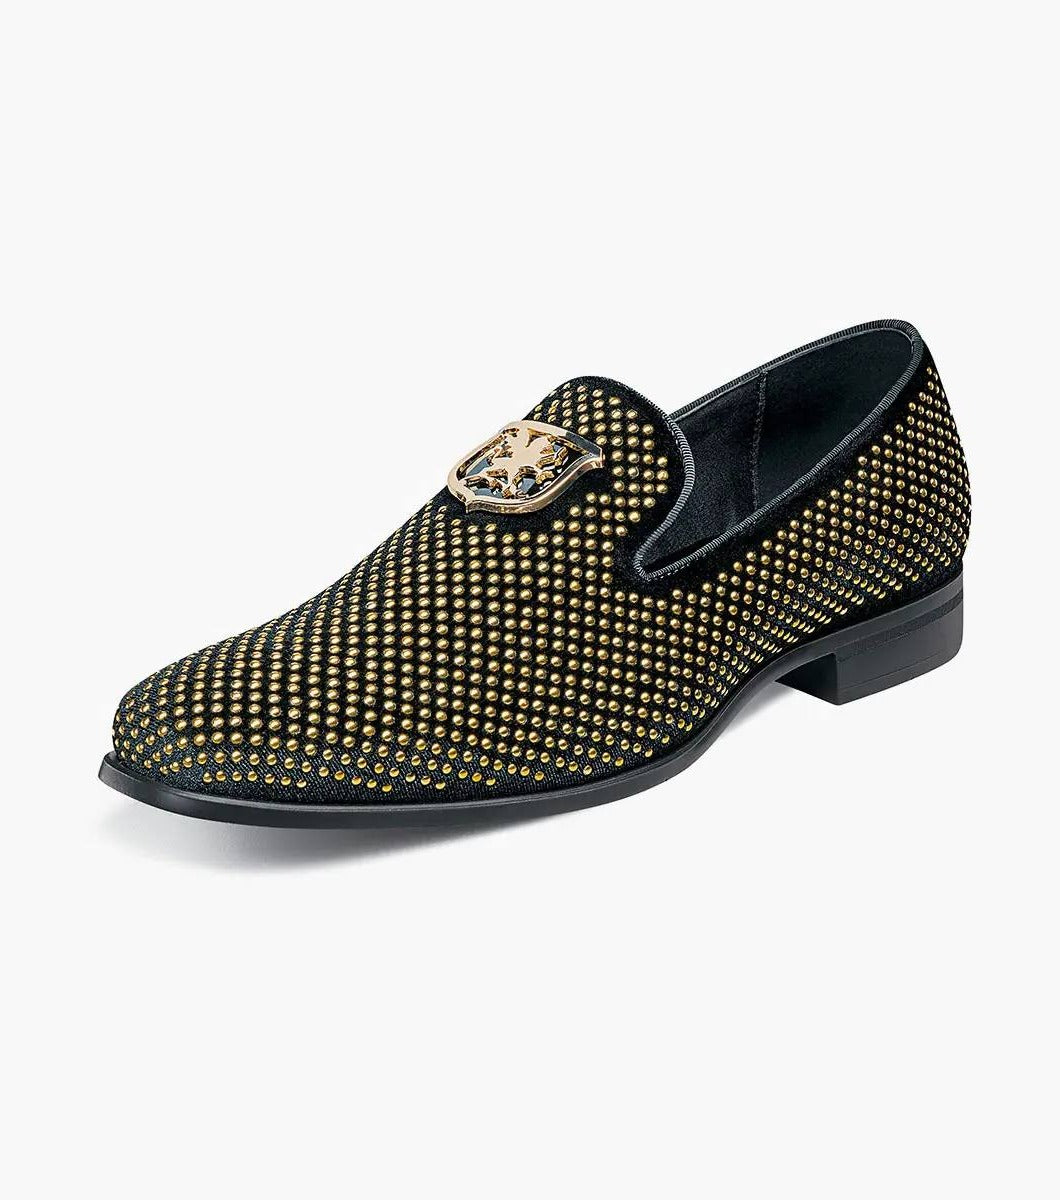 Stacy Adams SWAGGER Studded Slip-on Color: Black and Gold Available in Size 11.5